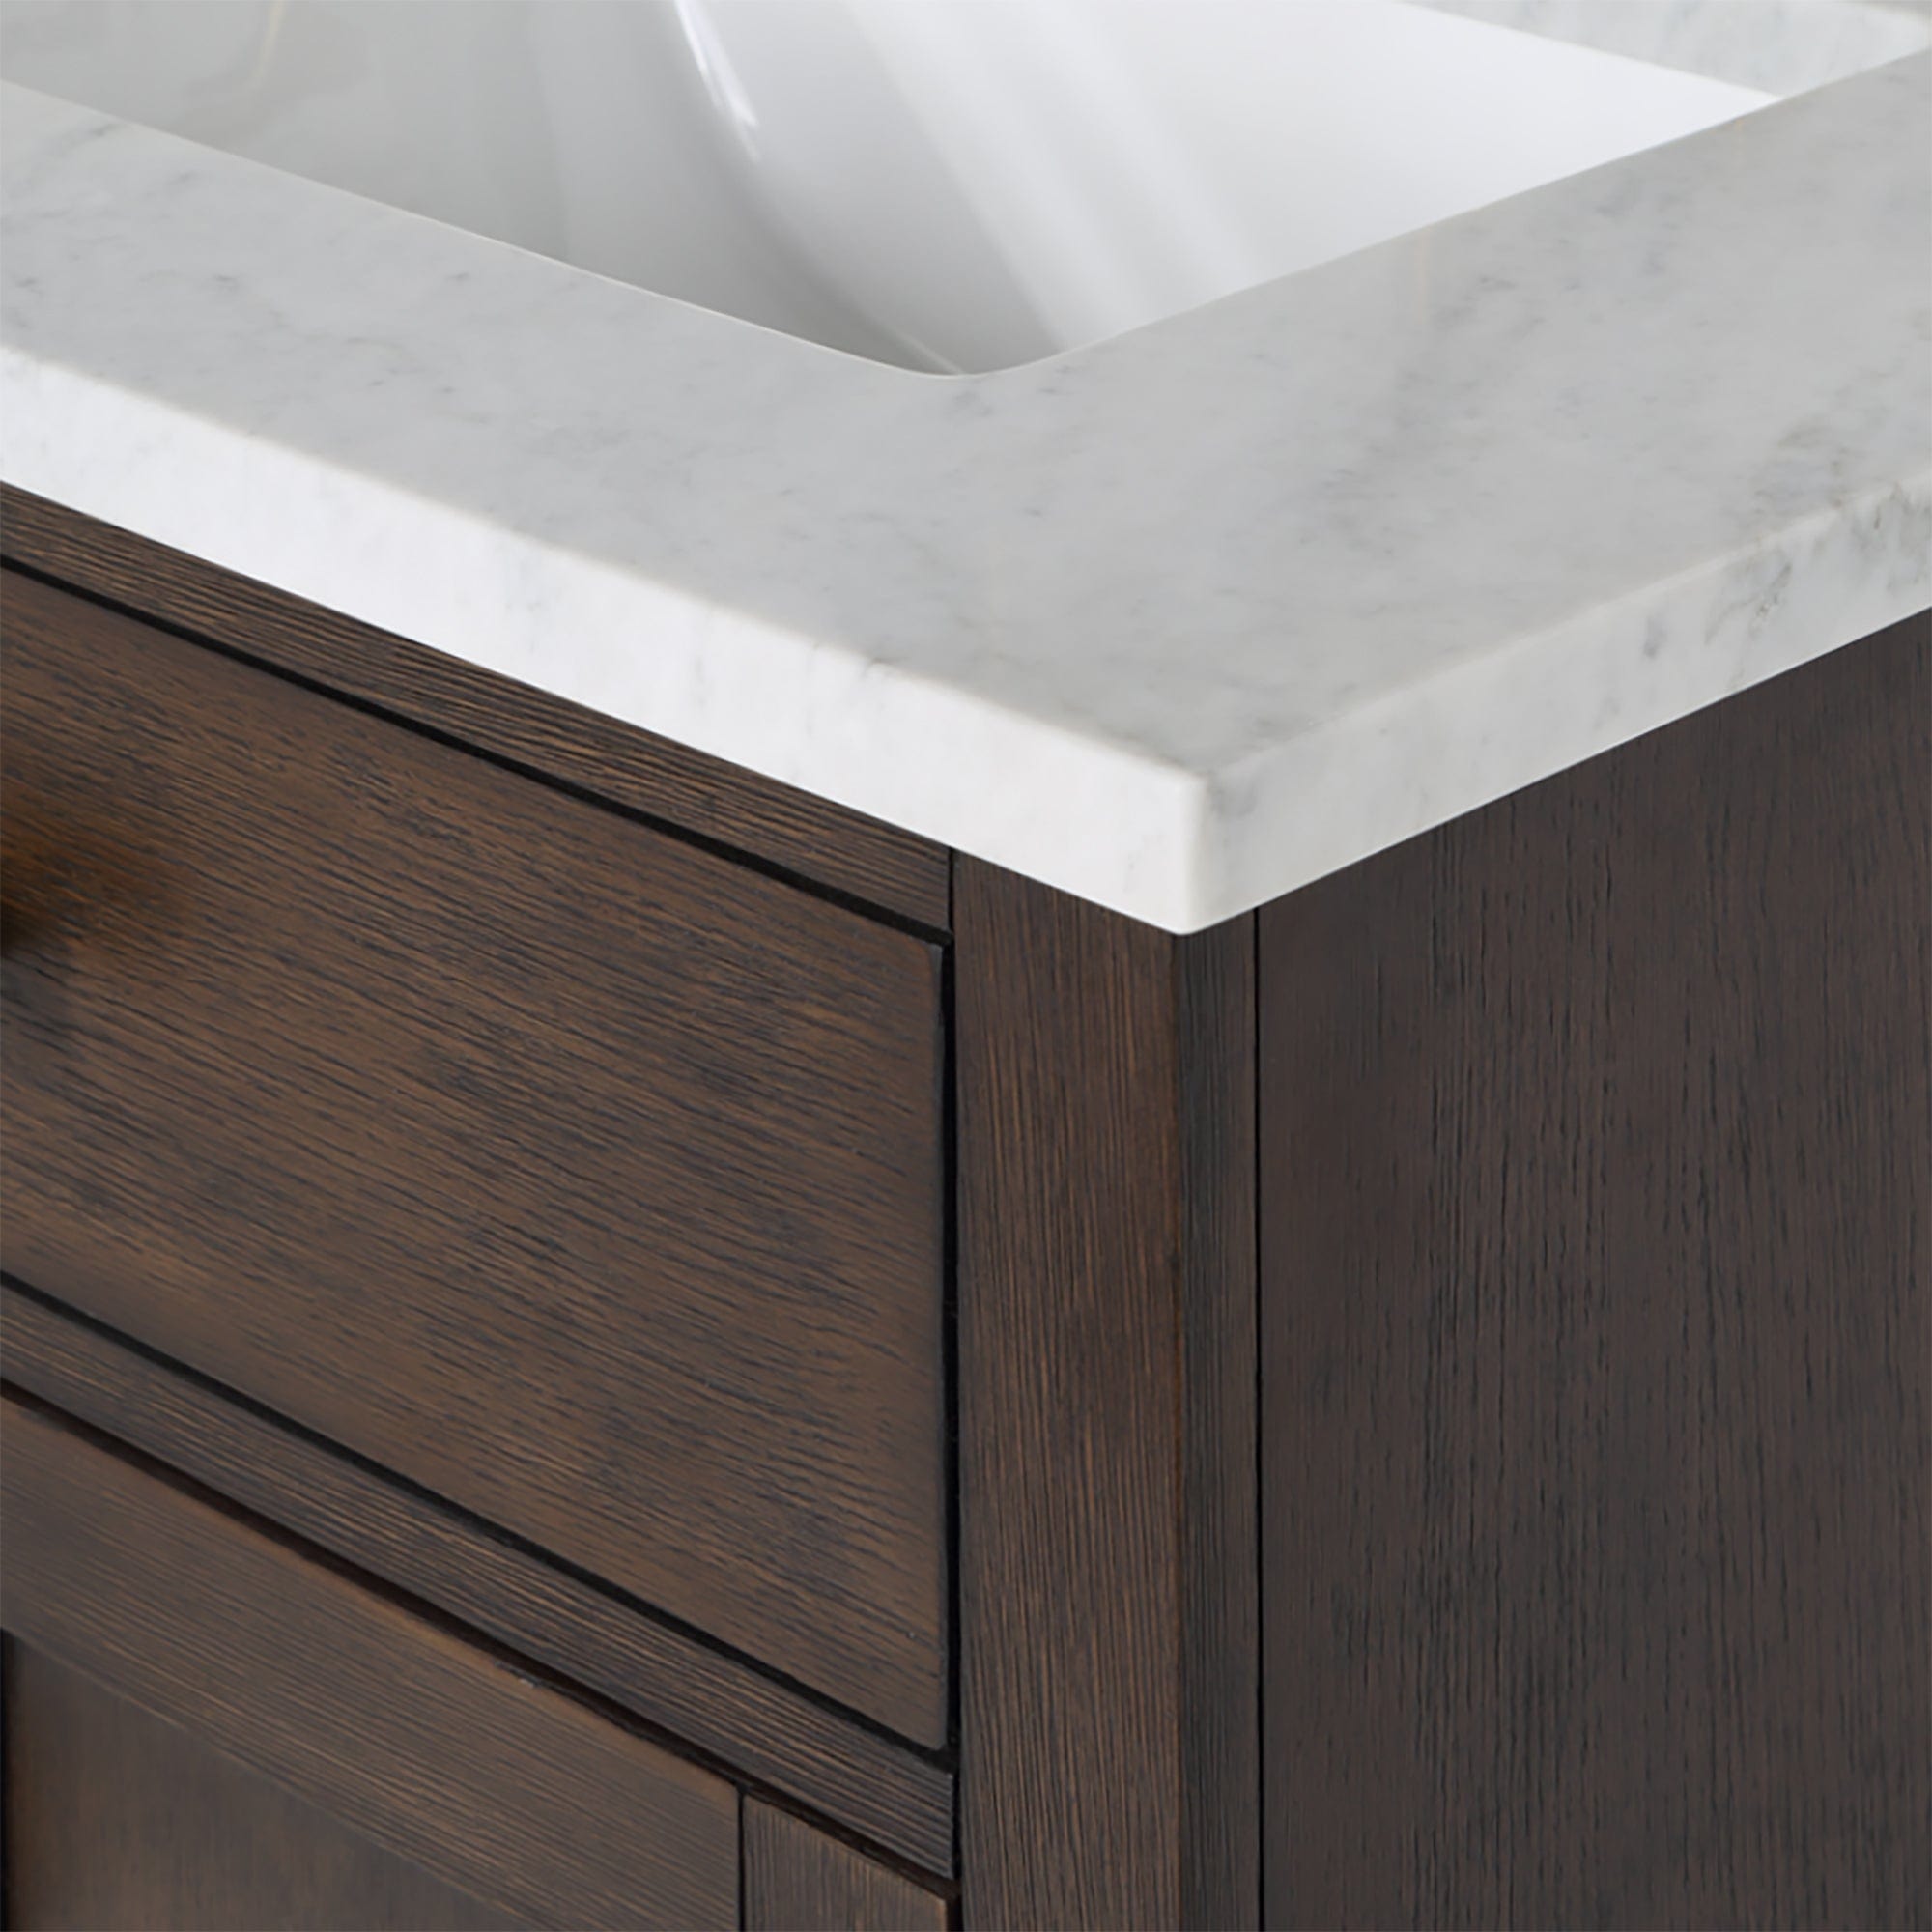 Chestnut 30 In. Single Sink Carrara White Marble Countertop Vanity In Brown Oak with Grooseneck Faucet - Molaix732030764668CH30CW06BK-000BL1406